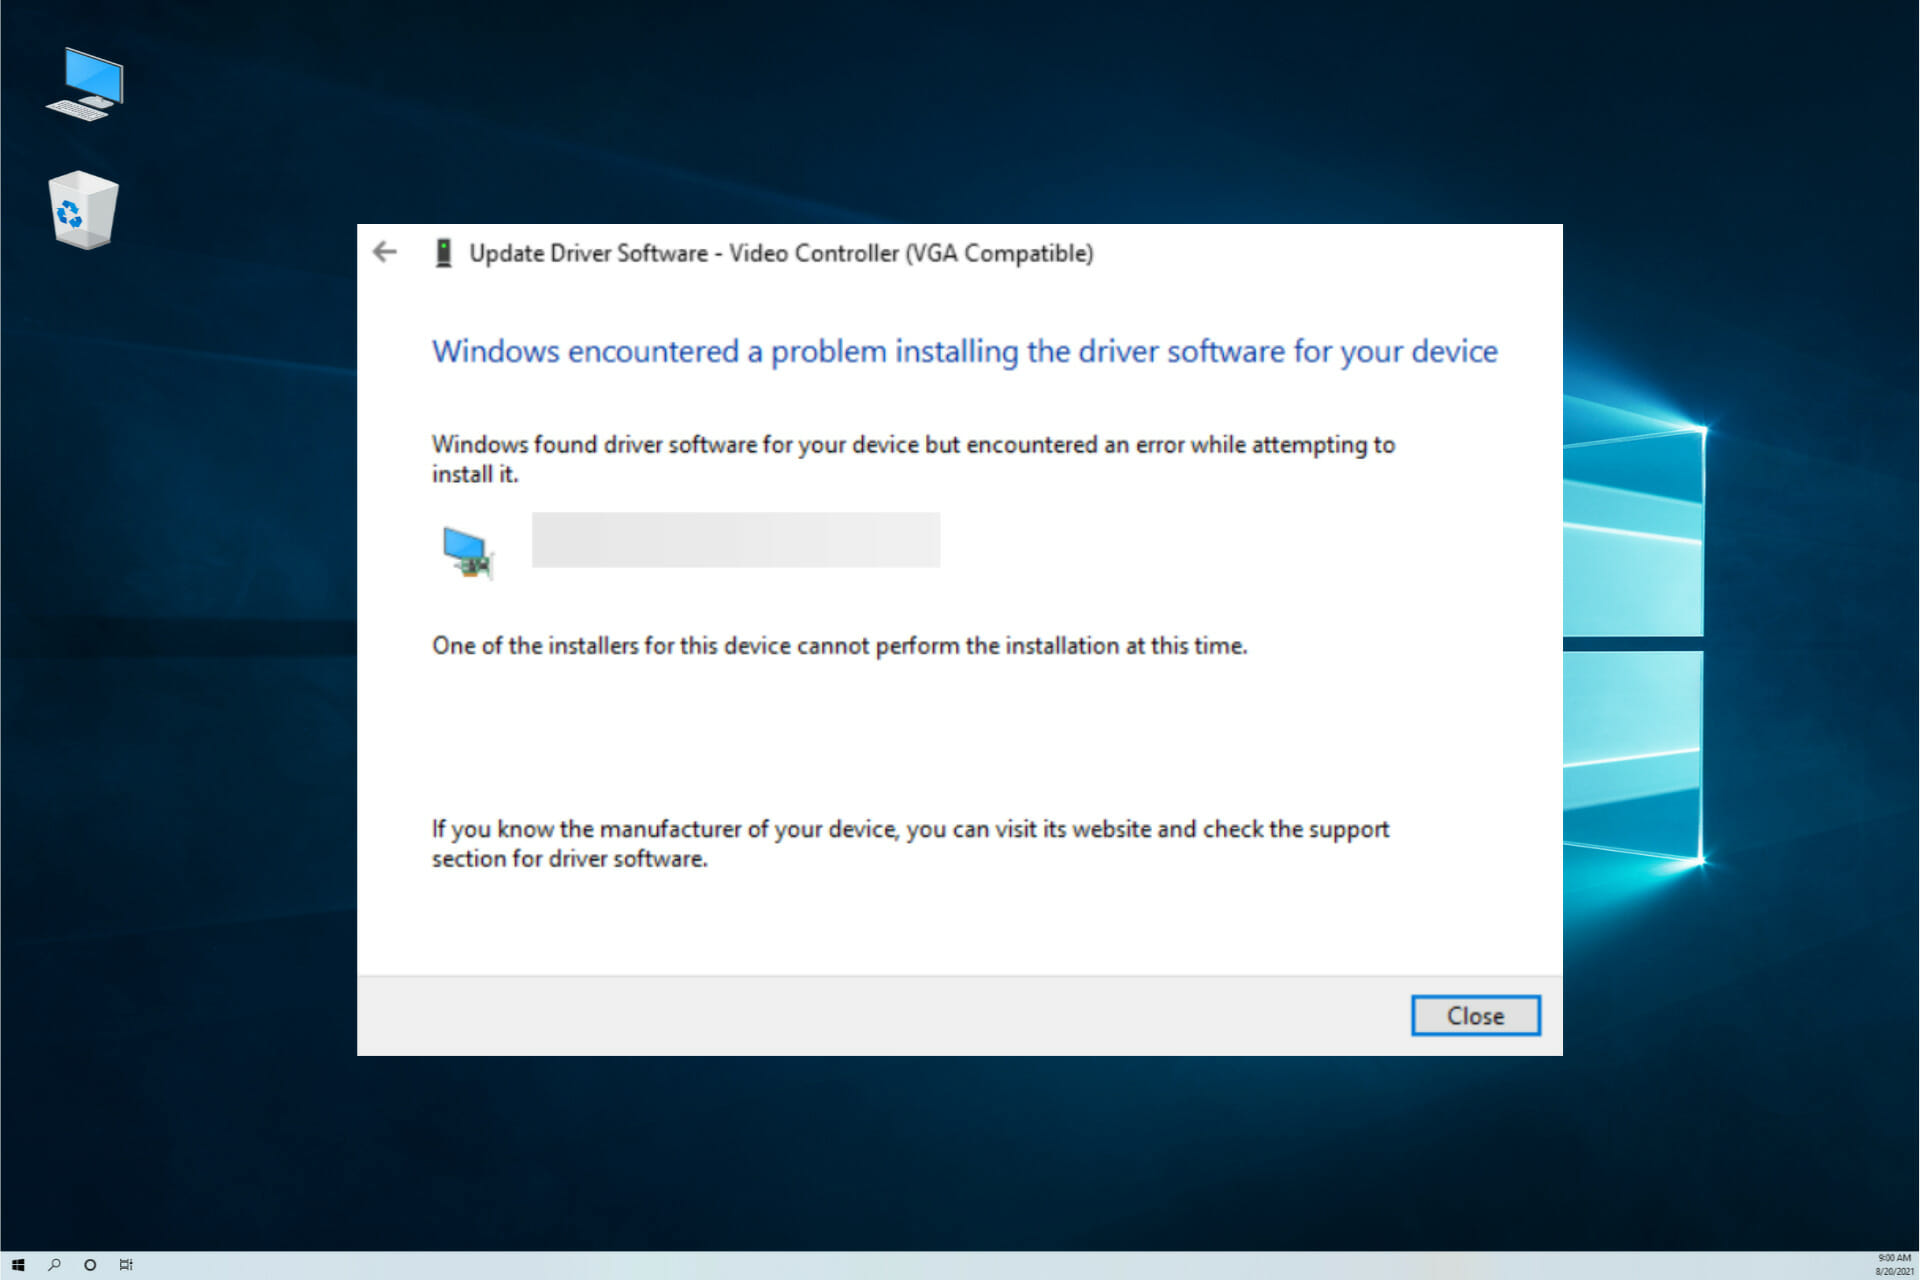 Fix Windows encountered a problem installing the driver software for your device